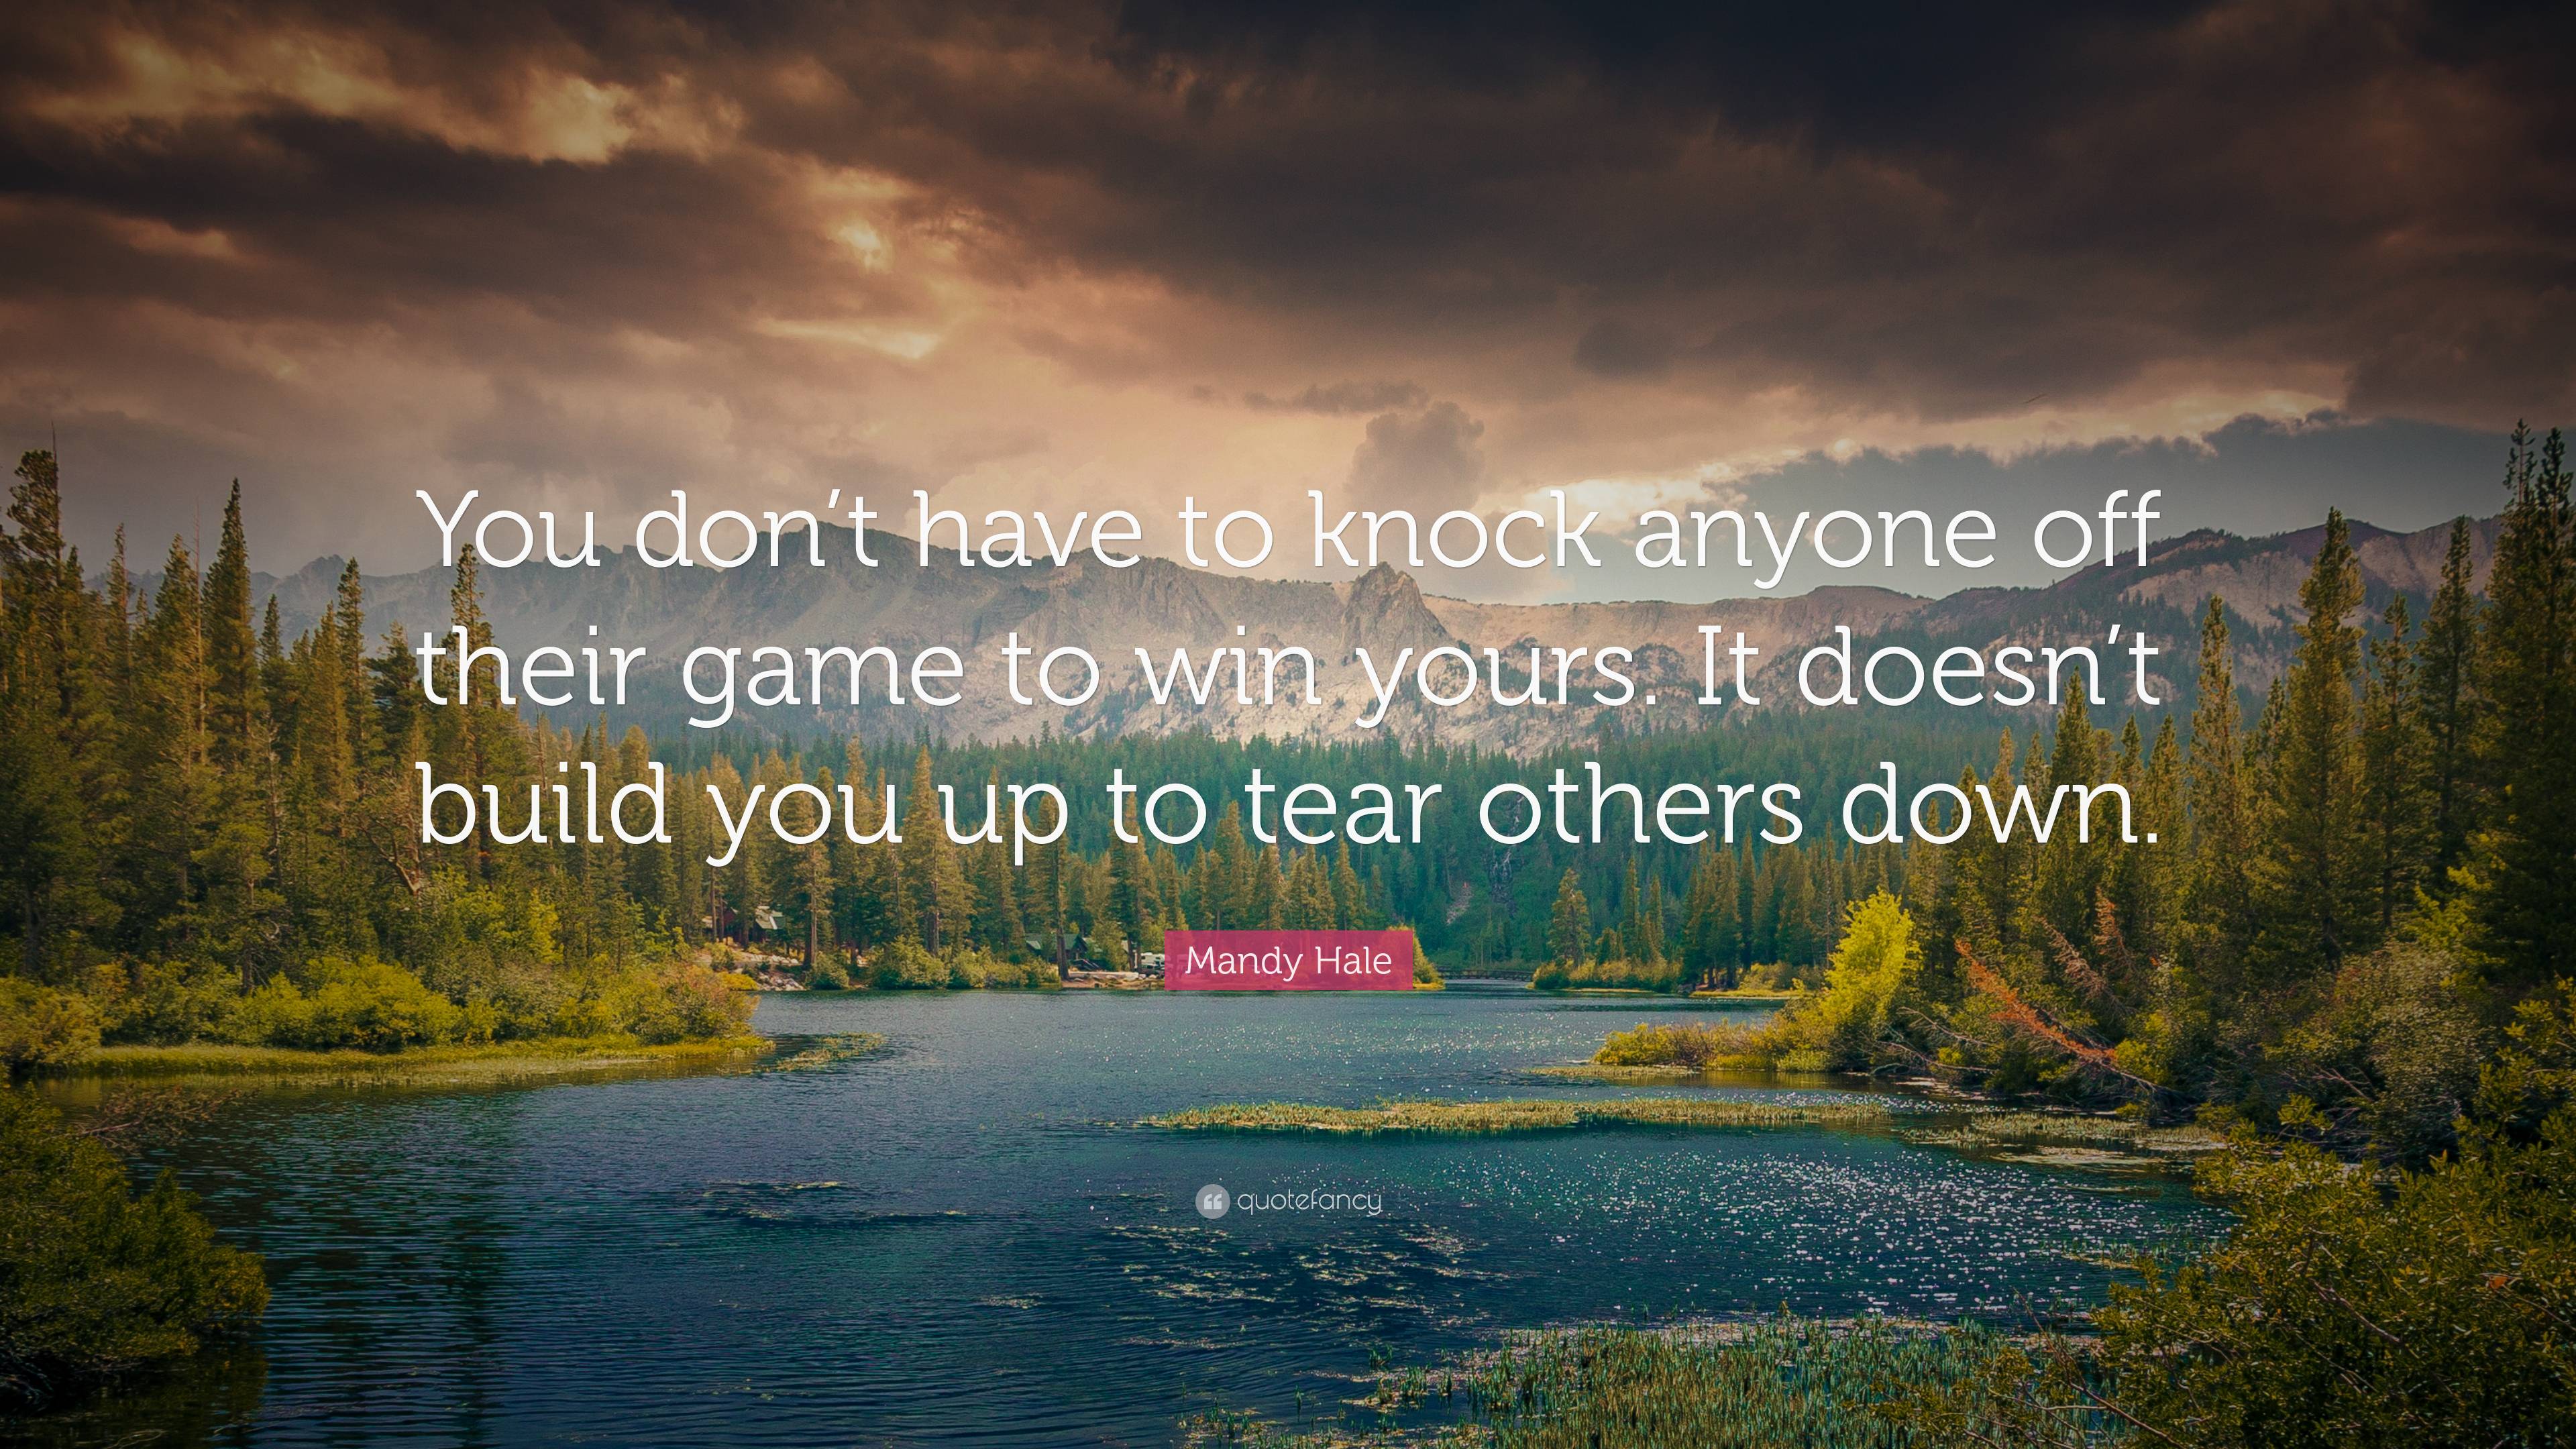 Mandy Hale Quote: “You don't have to knock anyone off their game to win  yours.